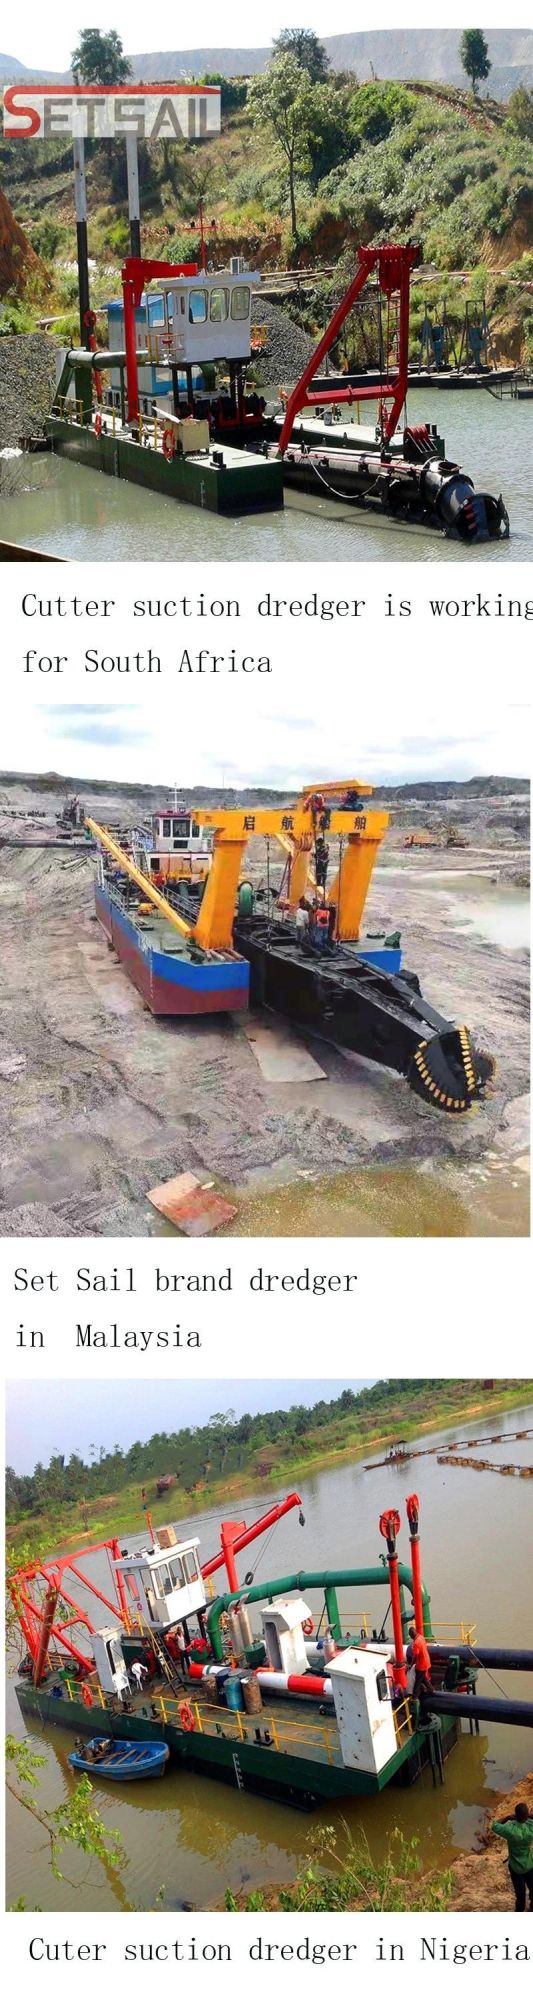 Full Automatic Control 22 Inch Cutter Suction Dredger for River